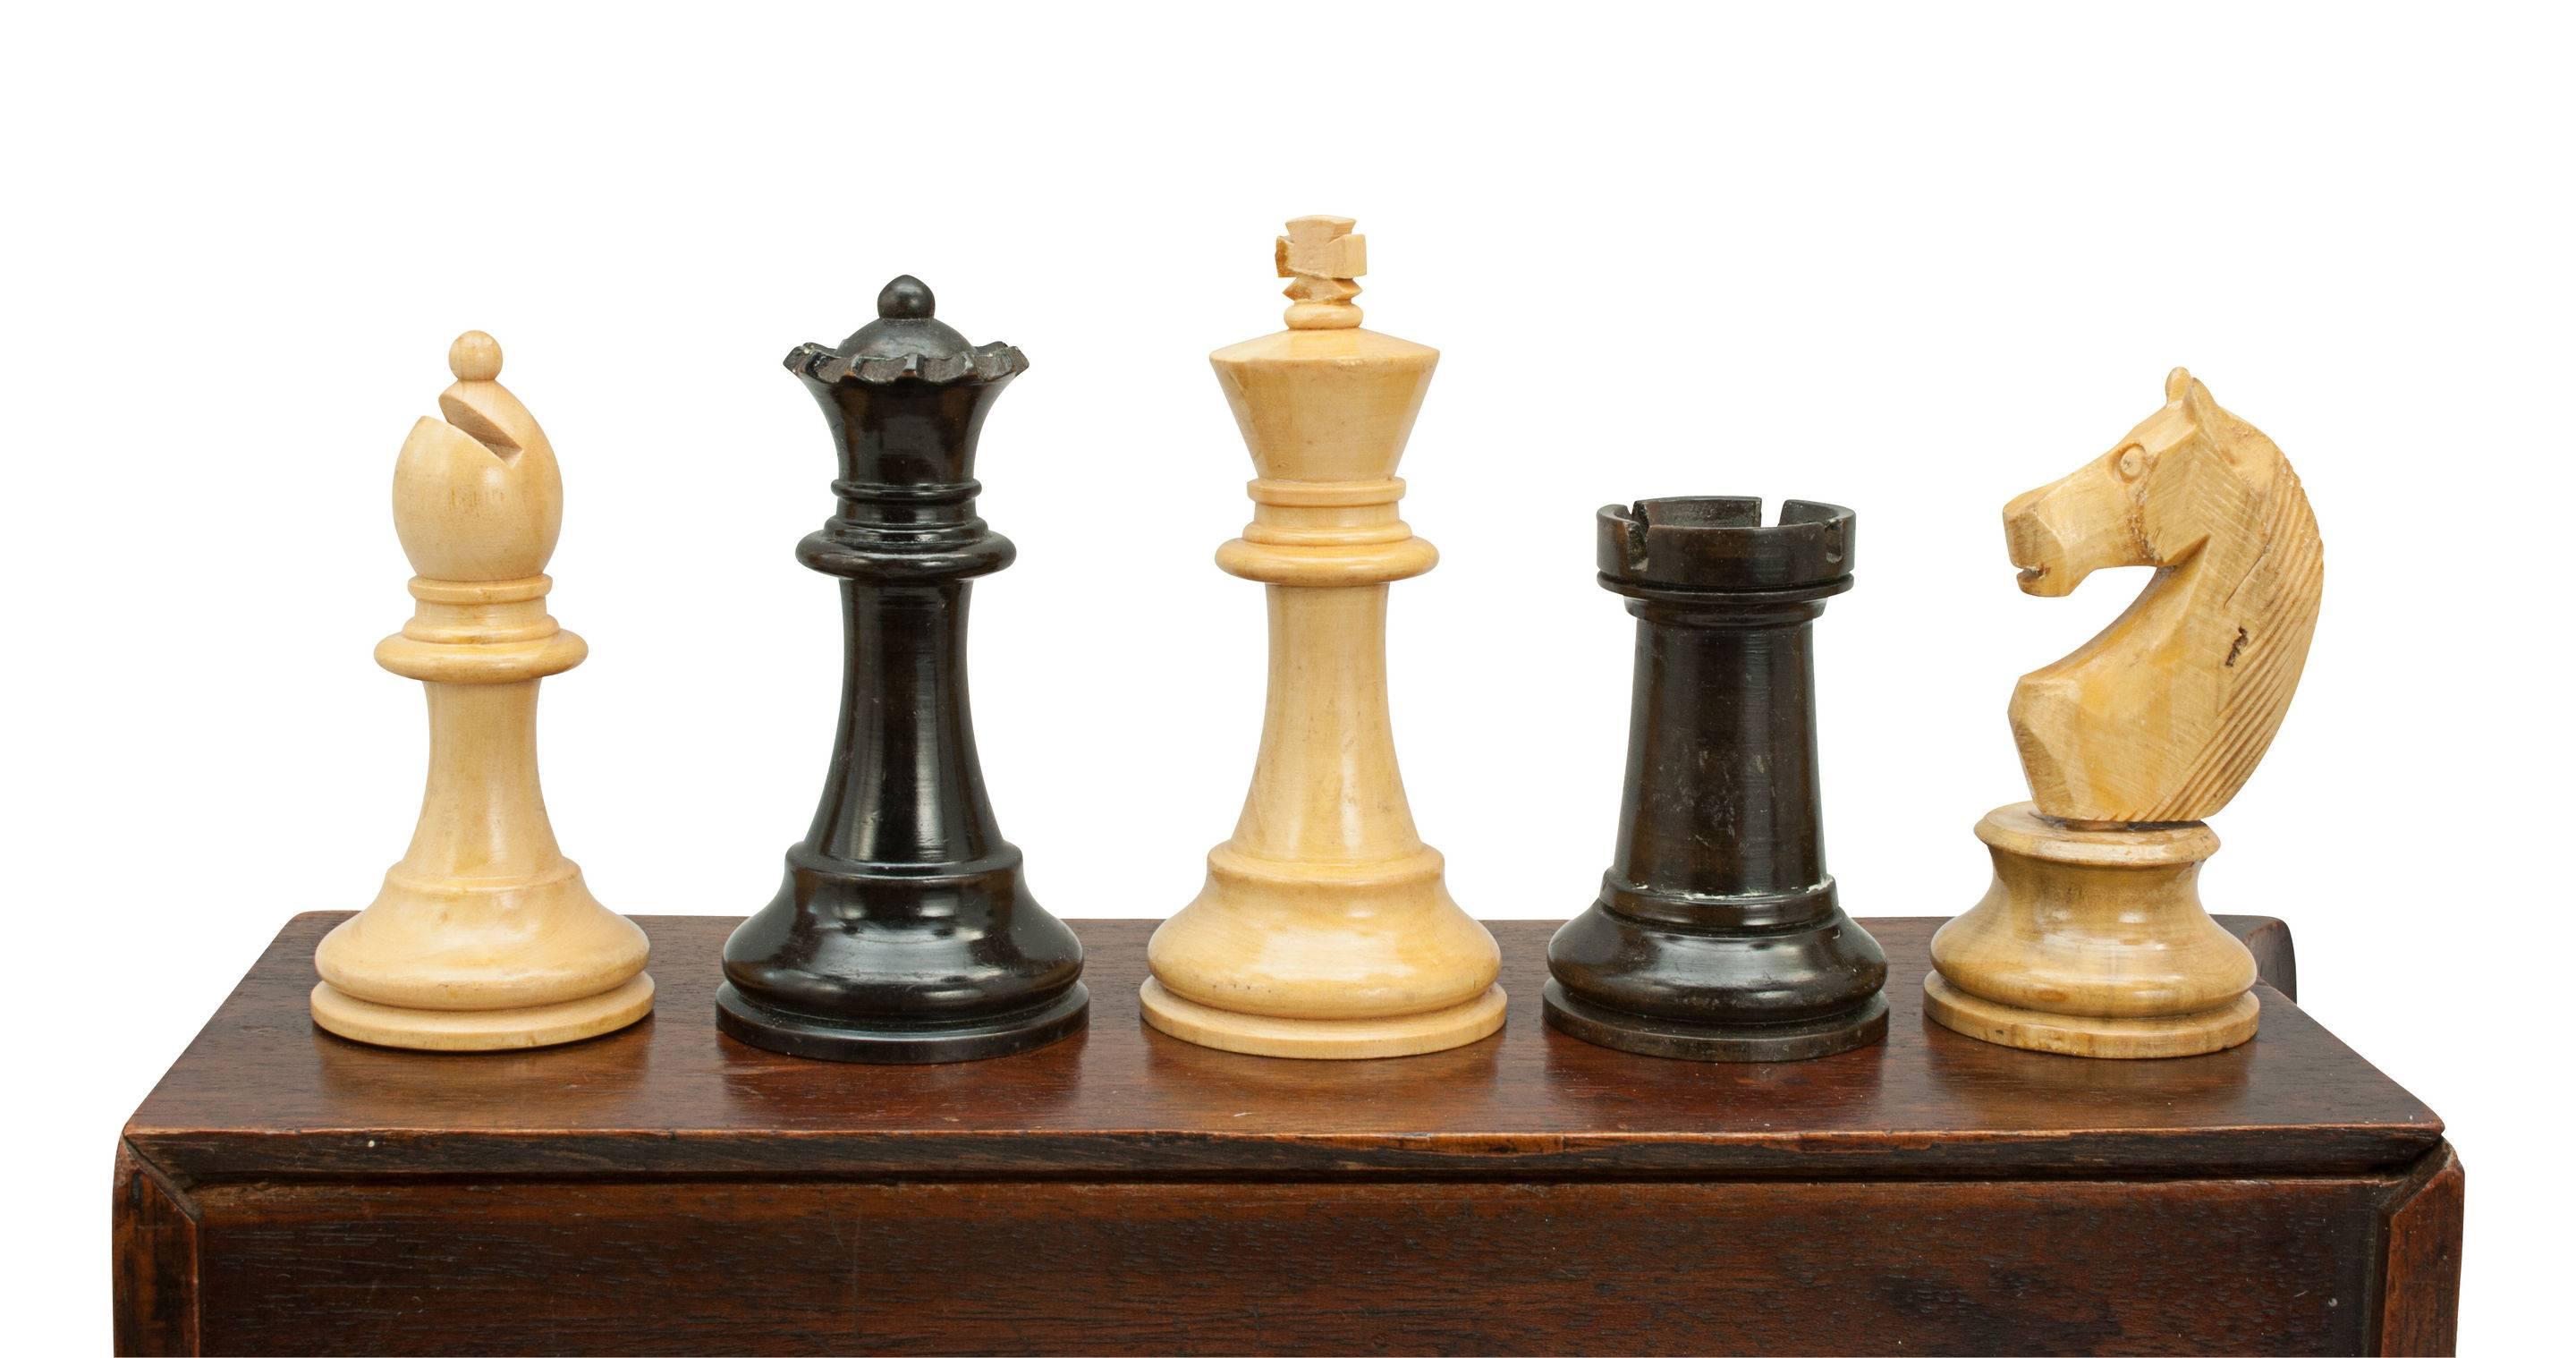 A well turned chess set in mahogany box with sliding lid. The set has boxwood and ebonized figures. The King is 3 inches high and the pawns are 1 6/8 inch high. It is in very good condition with no damage to the pieces.